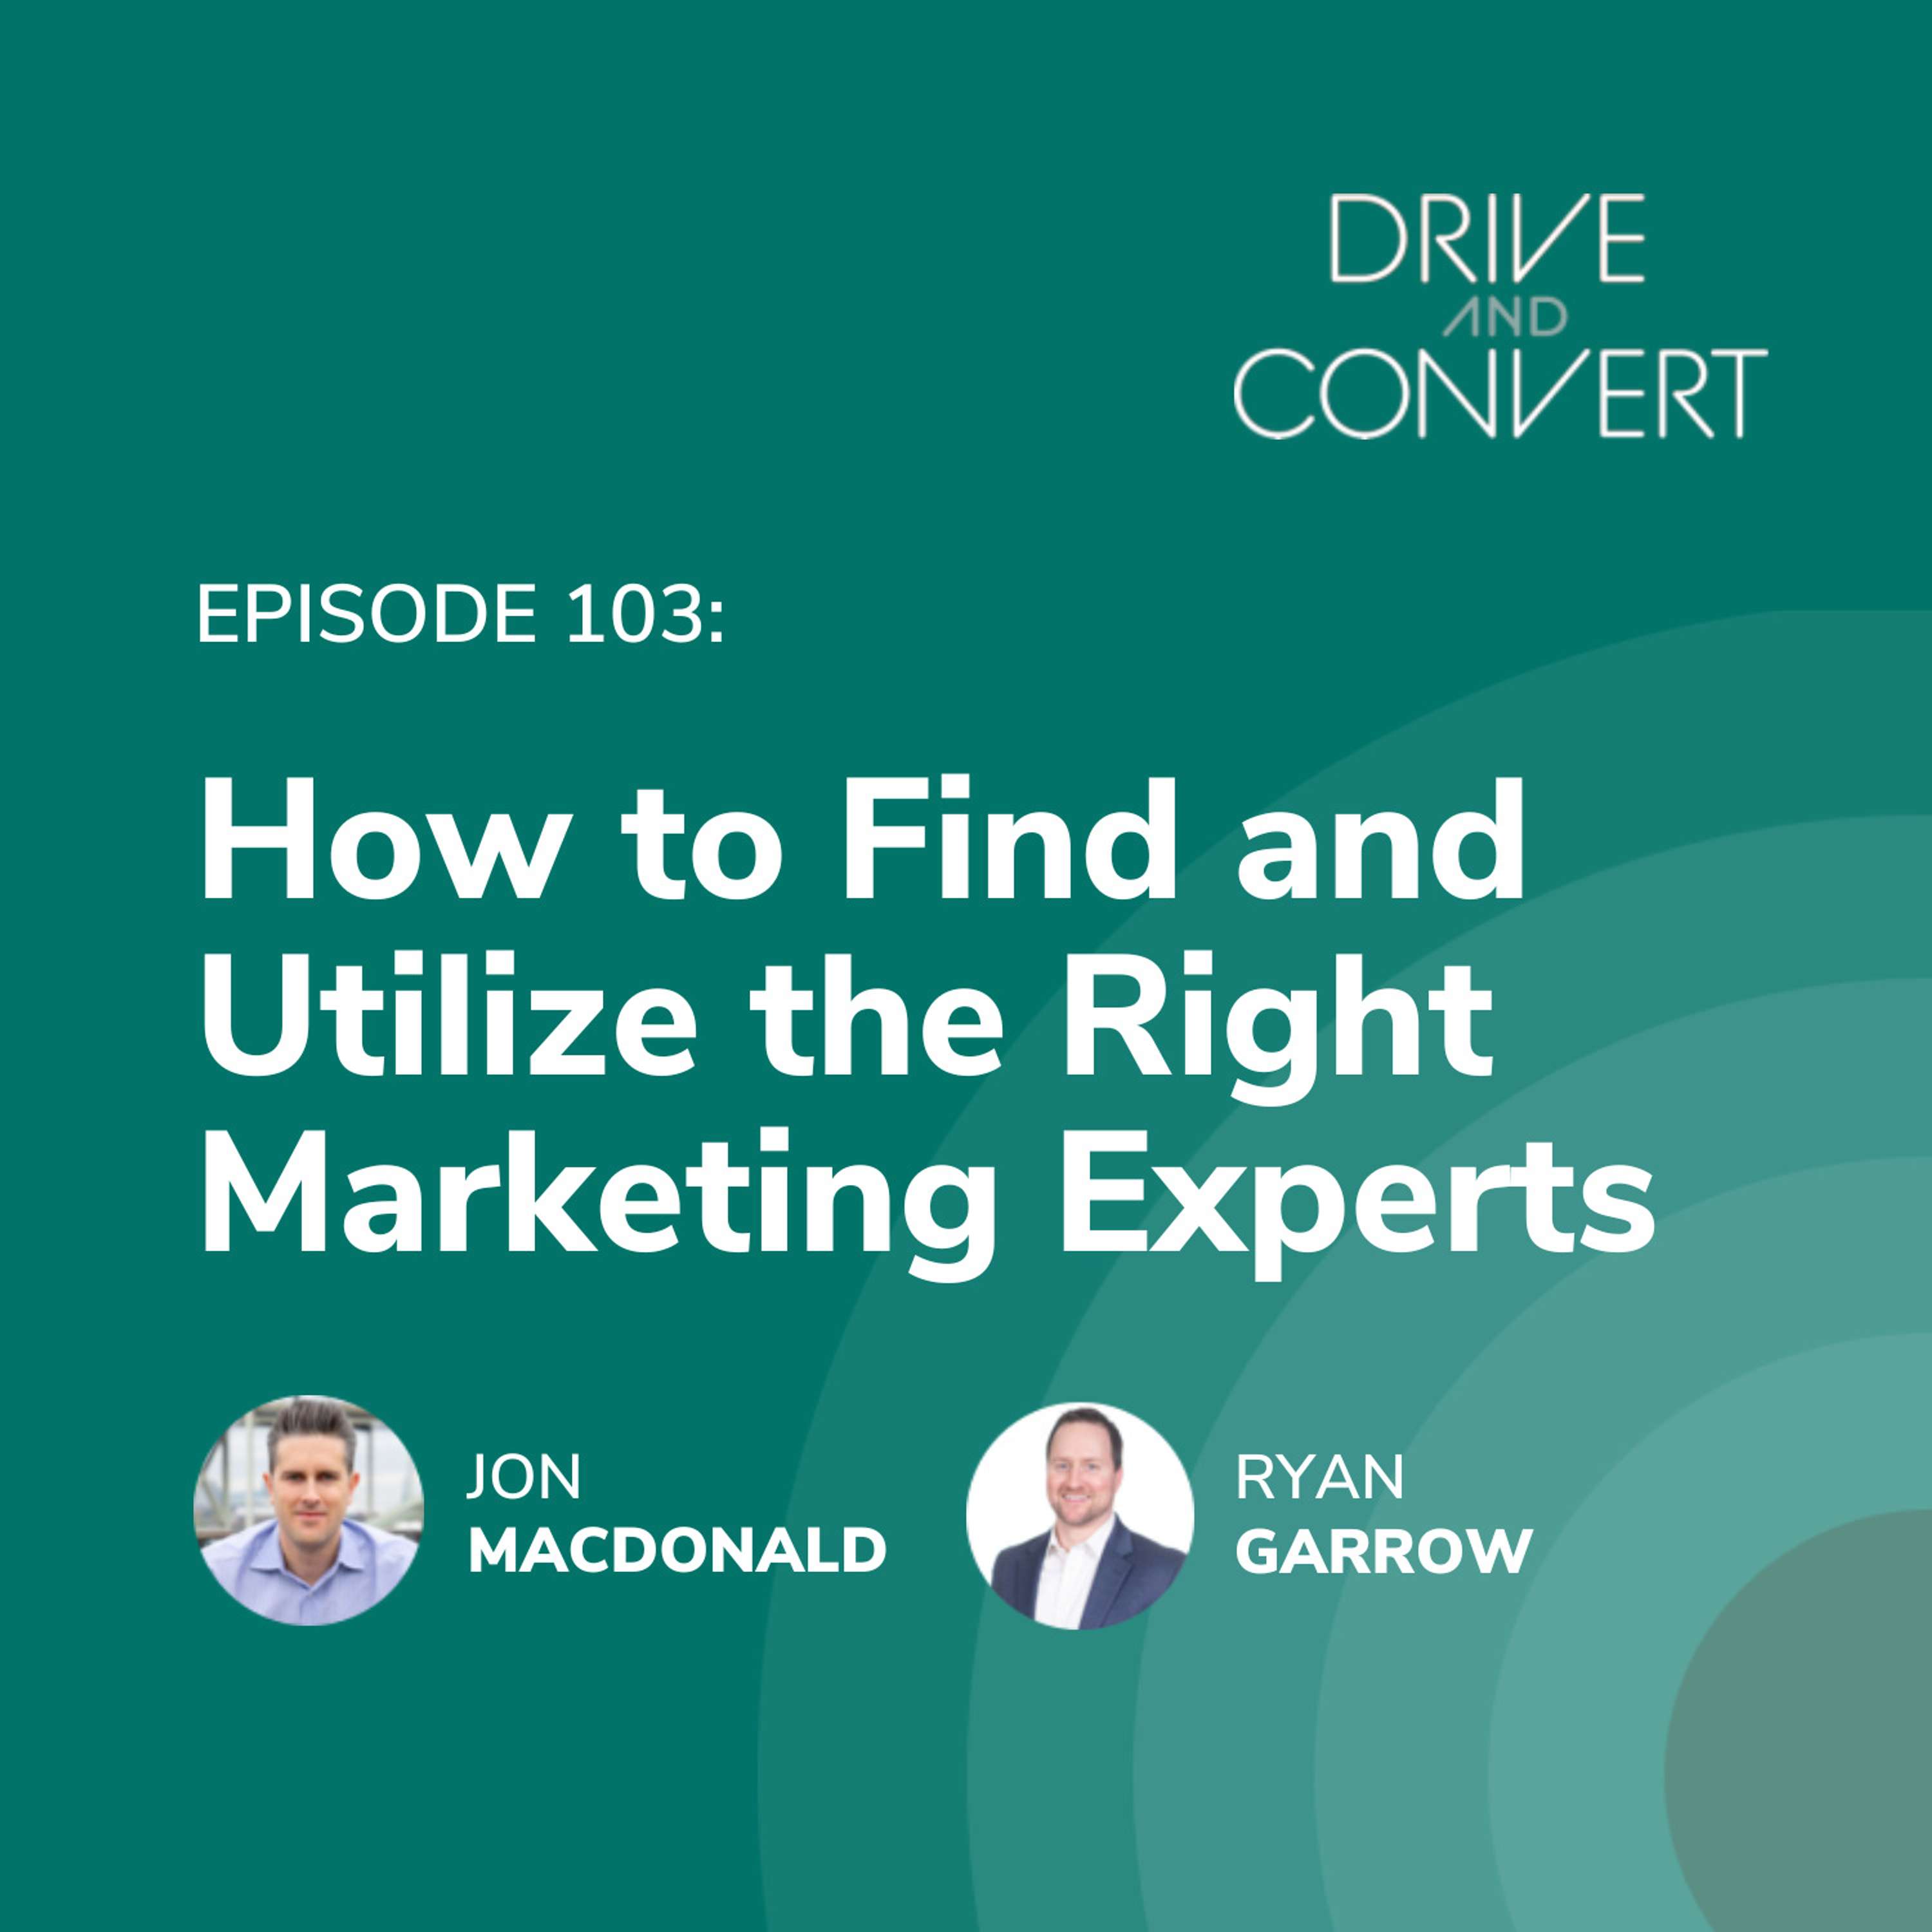 Episode 103: How to Find and Utilize the Right Marketing Experts